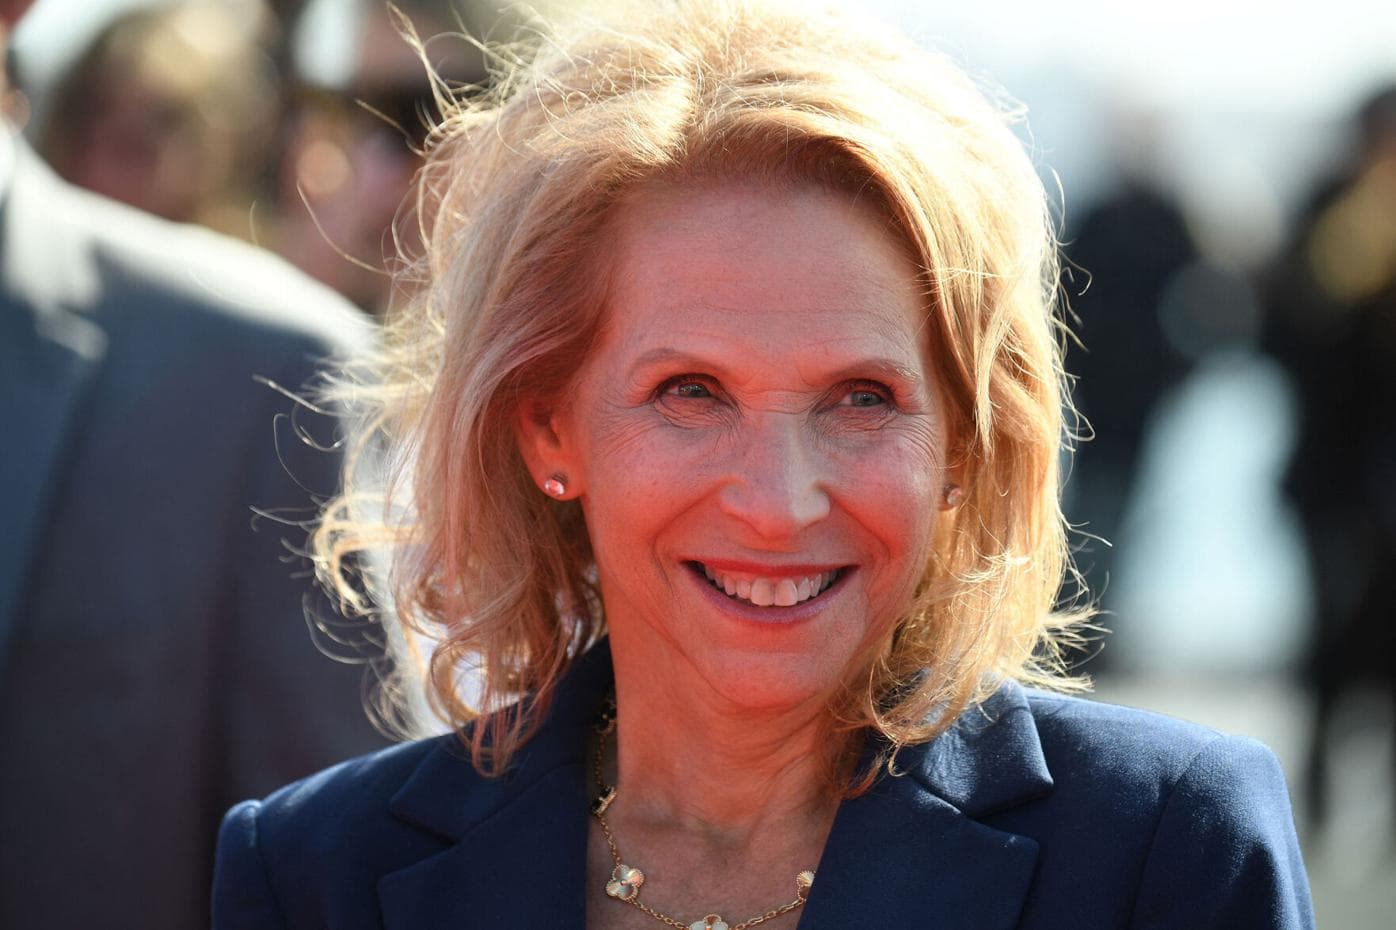 Shari Redstone Receives Fewest Votes in Paramount’s Board Election Amid Skydance Talks